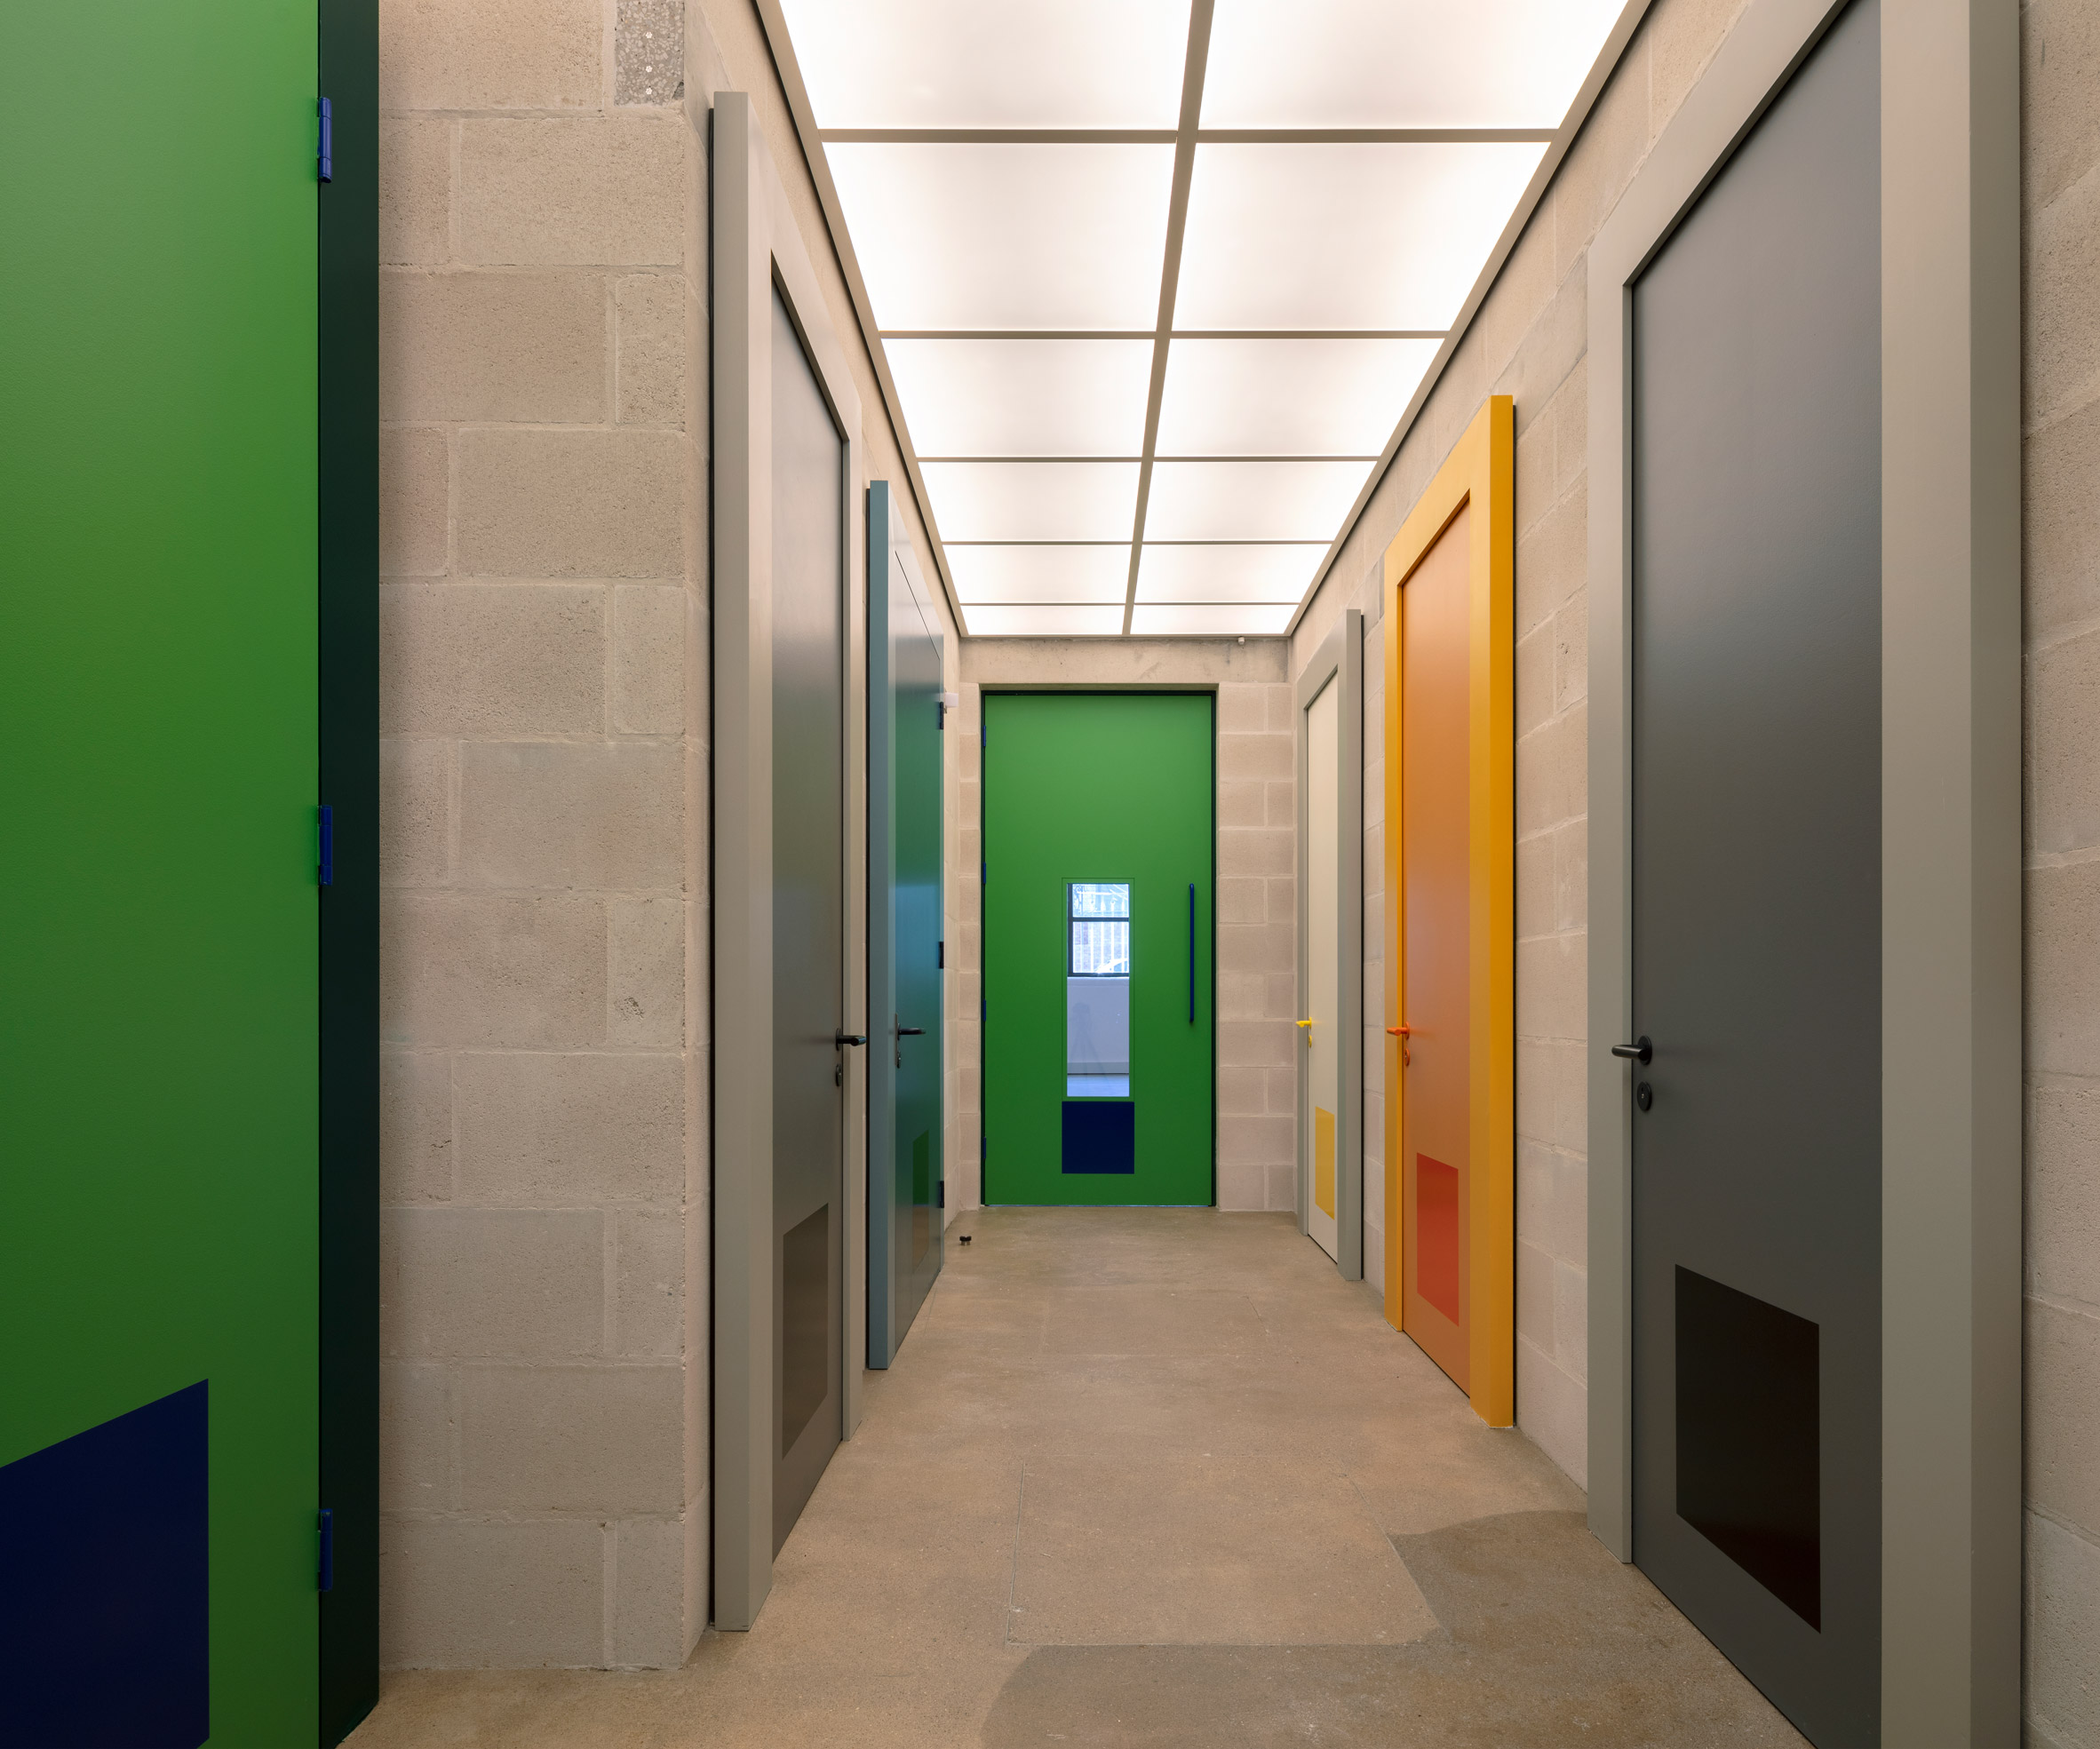 Colourful doors in Lazlo offices by Henley Halebrown